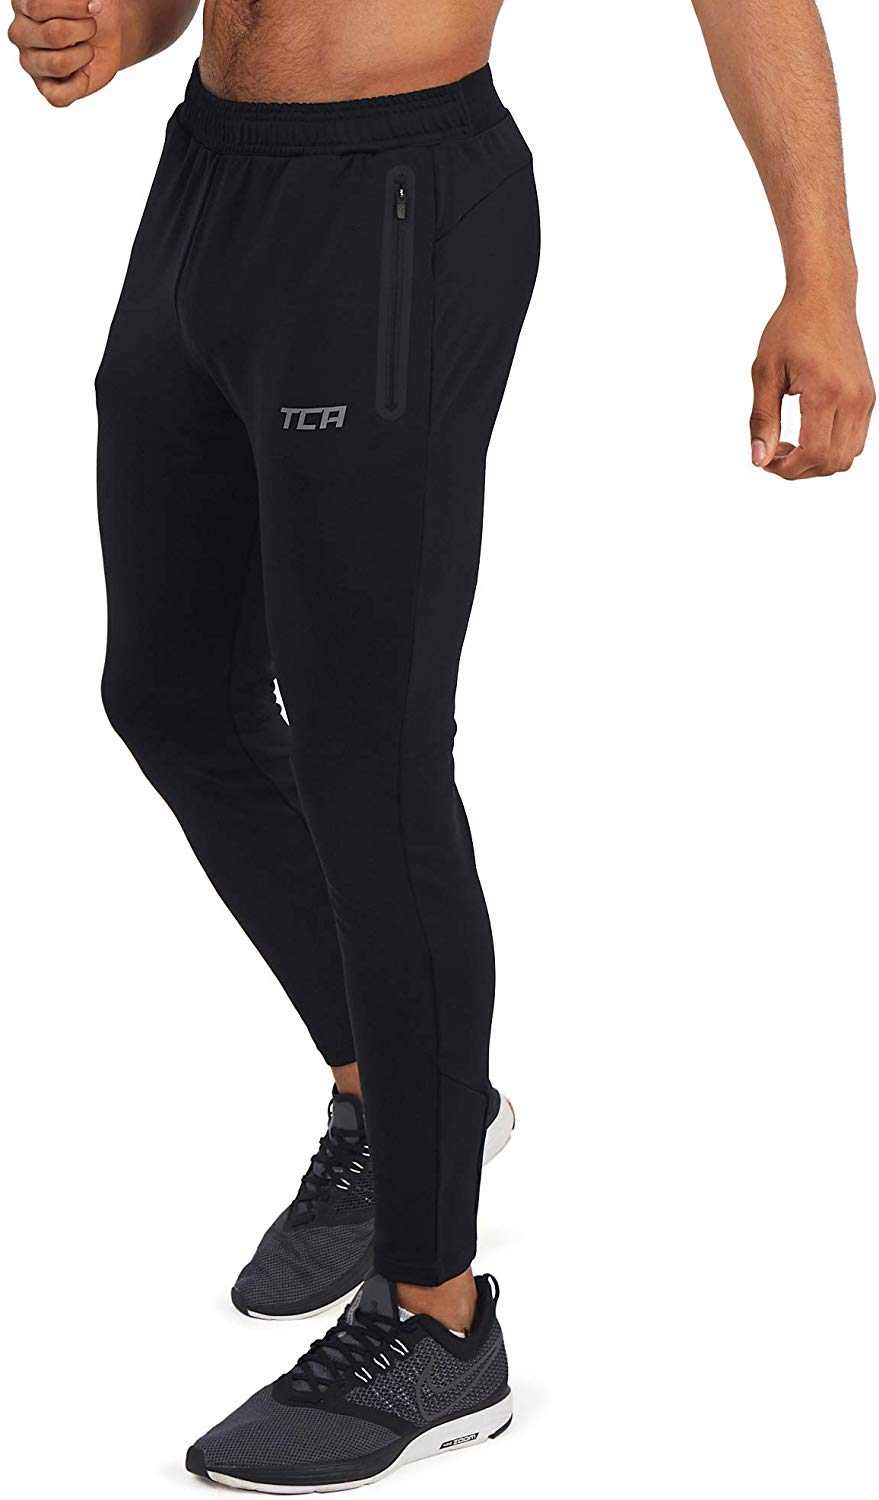 TCA Men's Rapid QuickDry Tapered Tech Training Track Pant with Zip Pockets